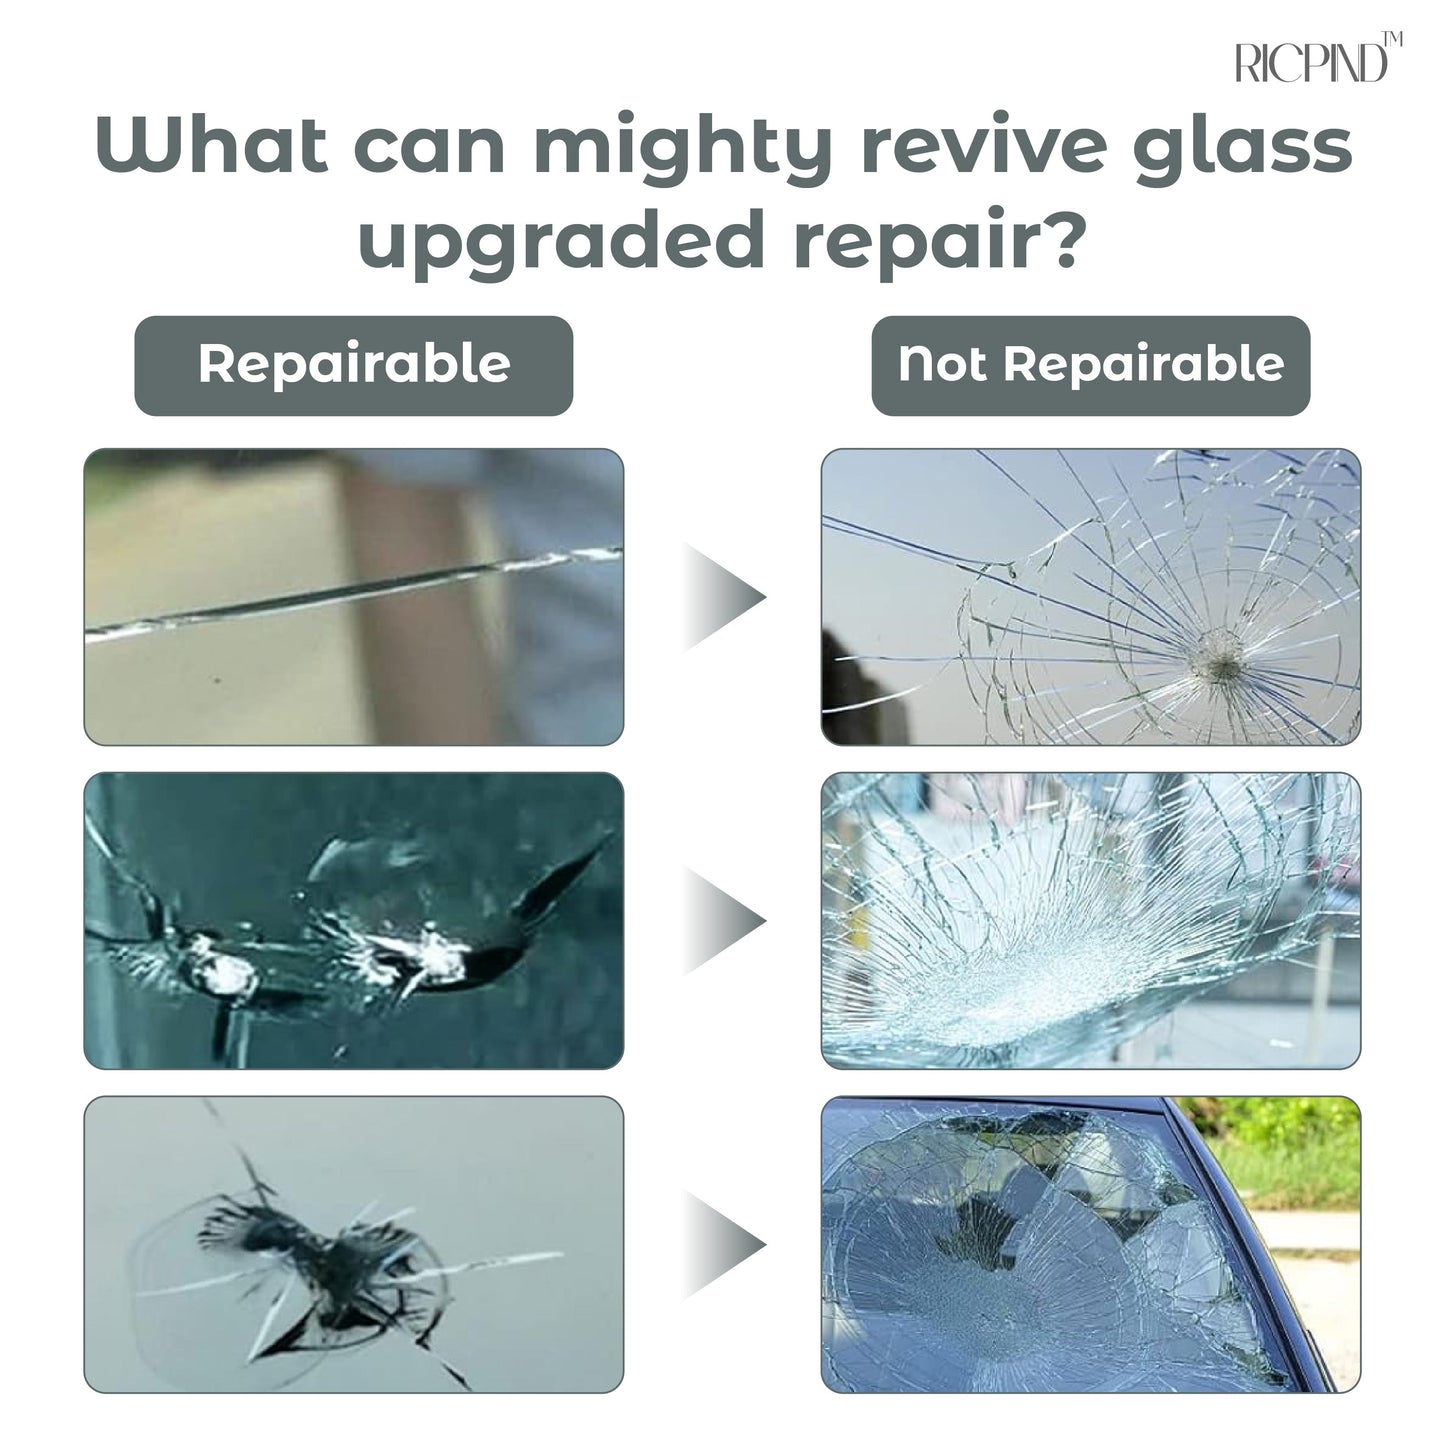 RICPIND Mighty Glass Revive Windshield Repair Kit